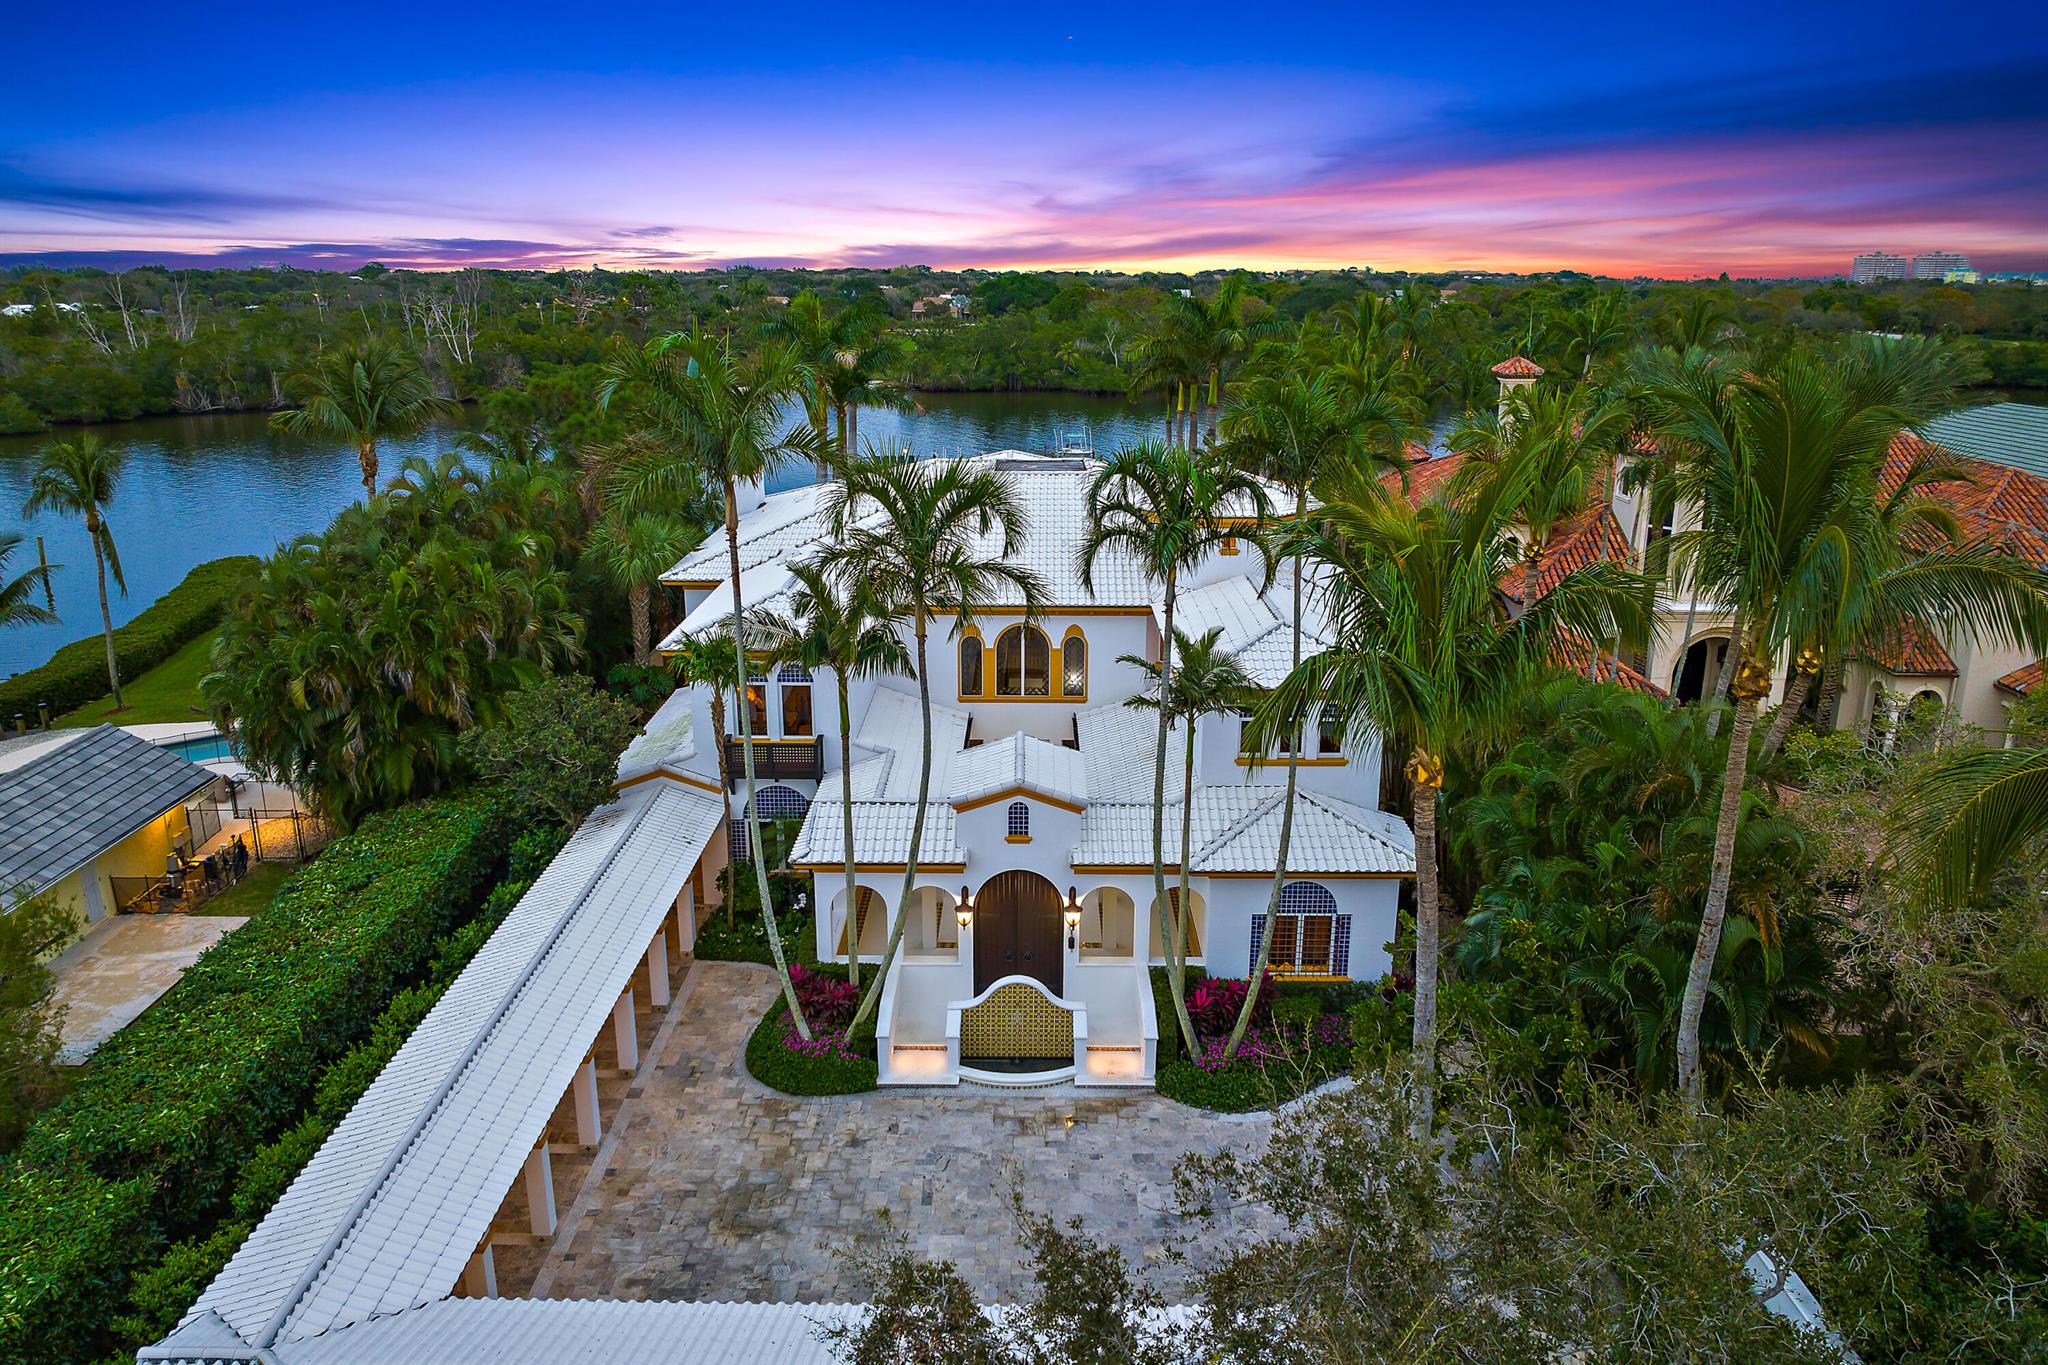 Extraordinary Intracostal Home For Sale in Palm Beach Gardens. Immerse yourself in the epitome of refined living, where every detail has been meticulously crafted to create a Moroccan-inspired haven. This 5 bedroom, 8 and a half bathroom home sits on .68 acres and is 7,175 sq ft under air (10,803 sq ft total). With direct access to the intracoastal, no fixed bridges, deep water, over 90 feet of direct waterfront, and a 120-foot dock, this home is well-equipped for the boat of your dreams. Jupiter & Palm Beach inlet less than 10 miles.  Remodeled in 2018, features include a newly added in-law suite, pool cabana, covered porch, balcony, an office, two boat lifts, a whole-home generator, brand new pool heater, and top of the line appliances from brands like Sub-Zero, Wolf, Jenn-Air, and Tru